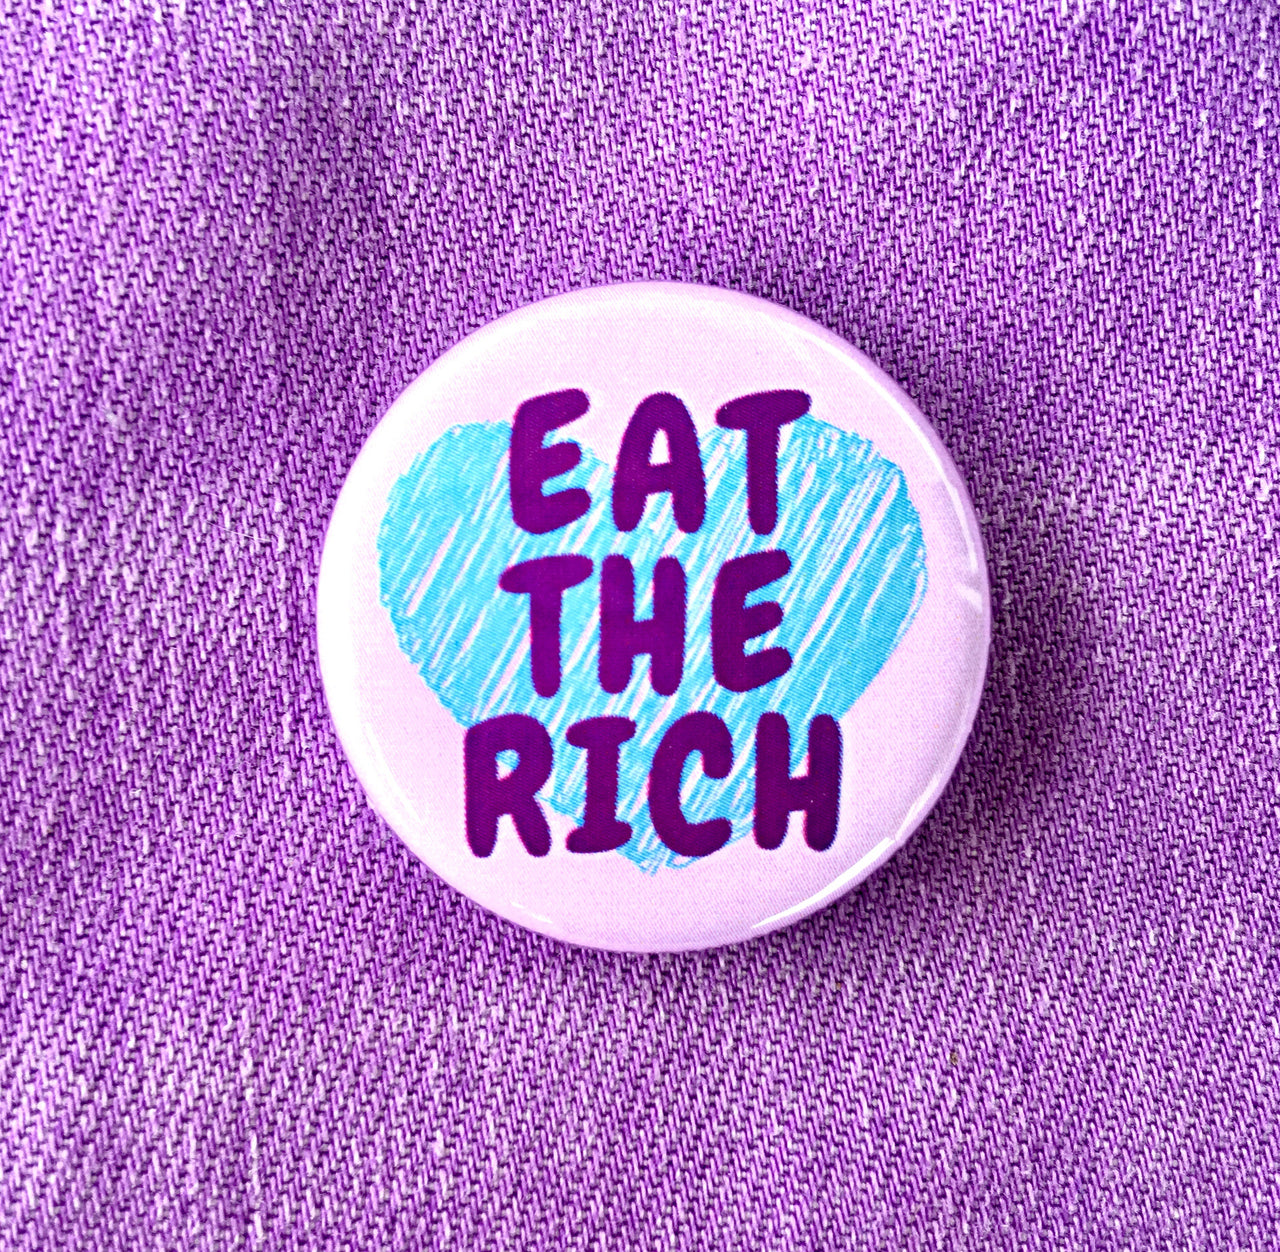 Eat the rich anarchist button - Radical Buttons